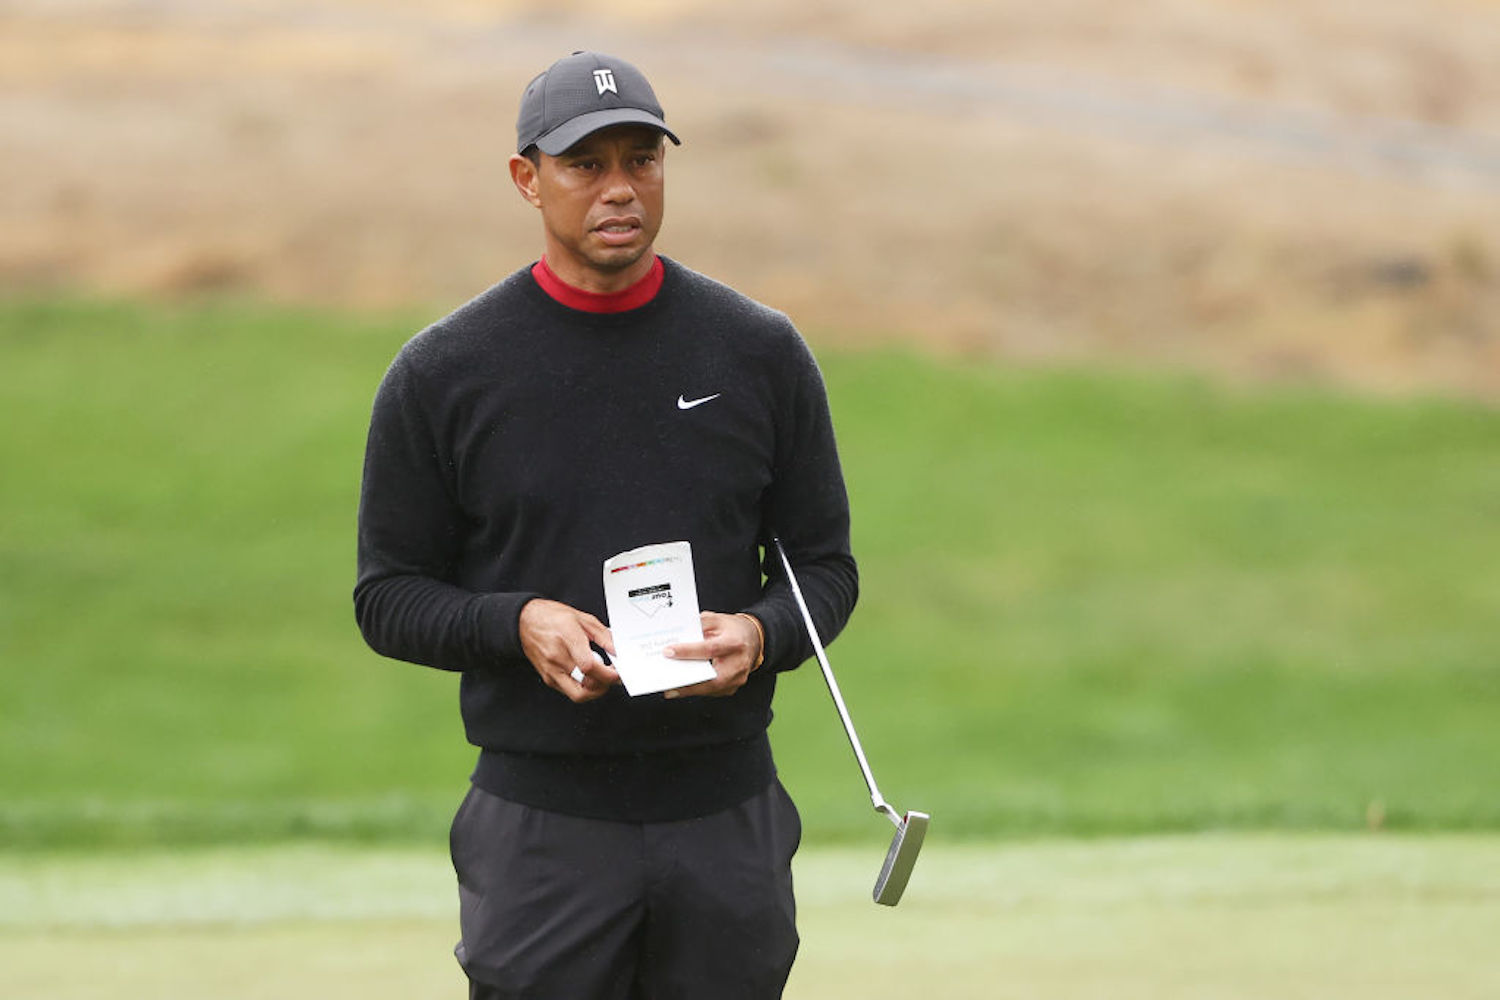 Tiger Woods isn't playing great golf right now, and now he won't have a chance to tweak his game before The Masters on Nov. 12.